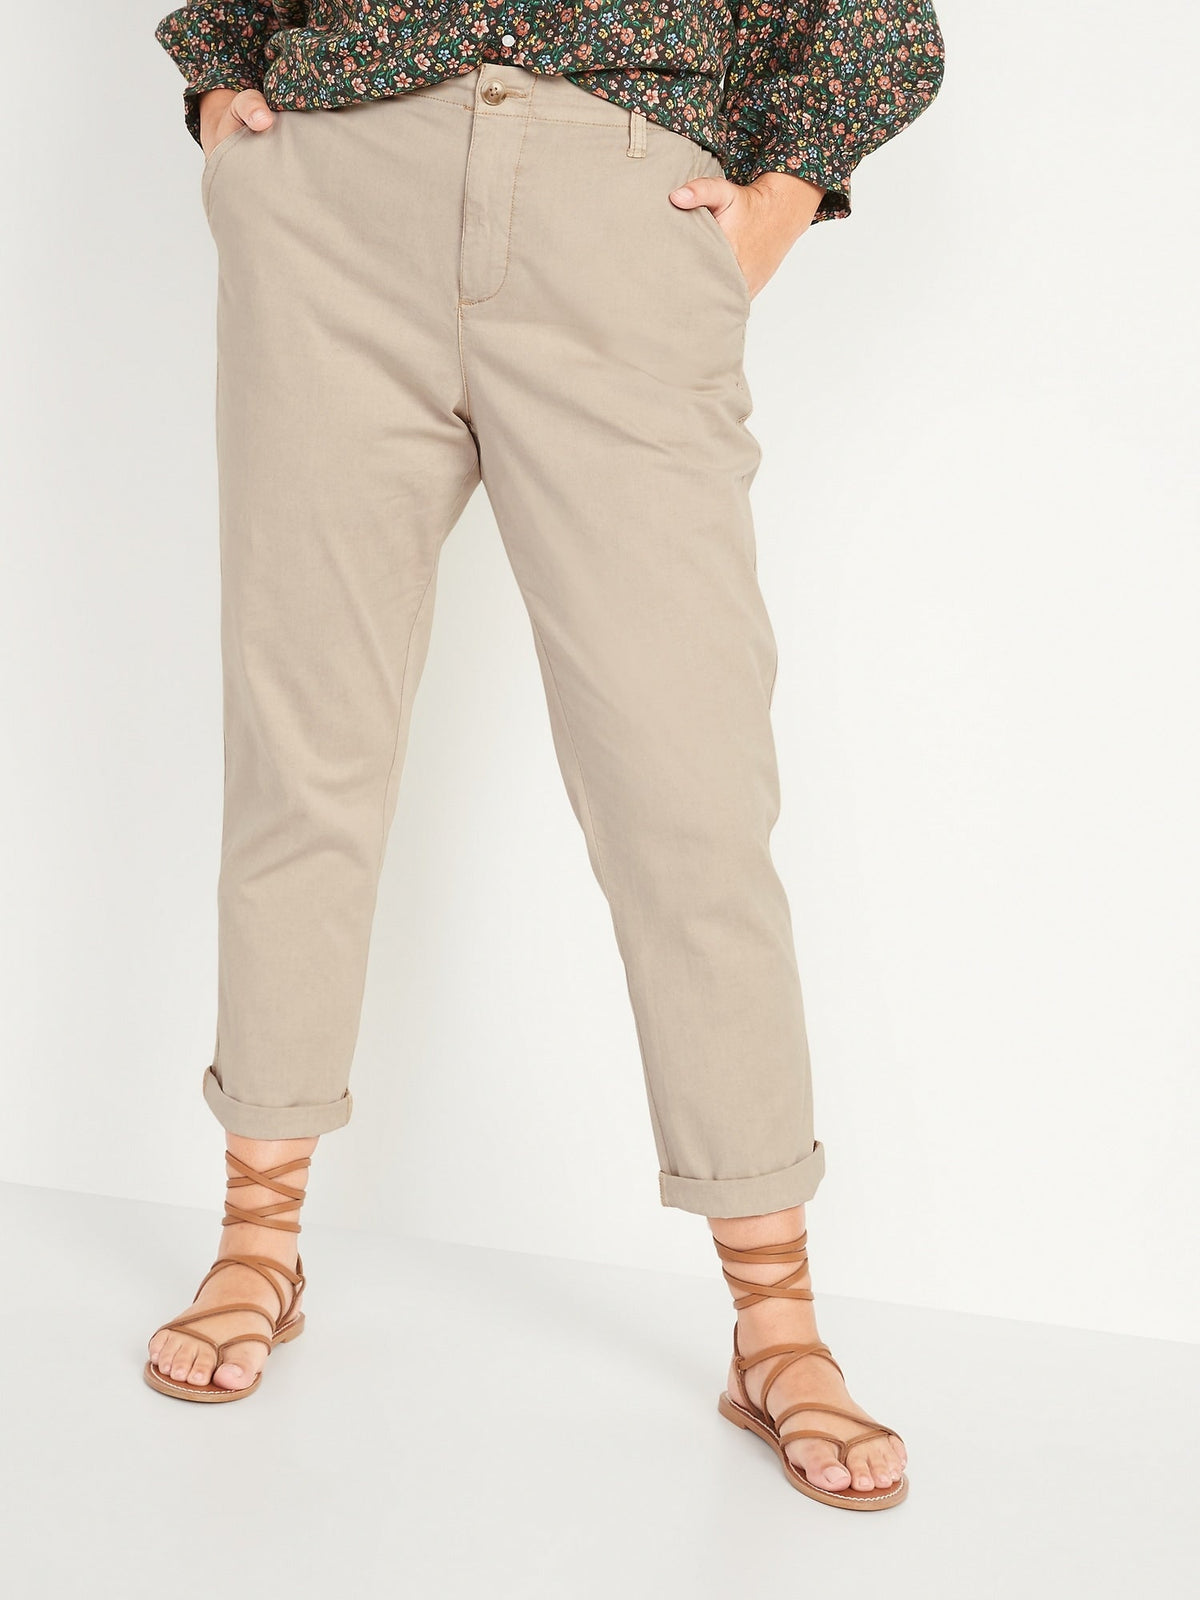 High-Waisted OGC Chino Pants for Women - Old Navy Philippines